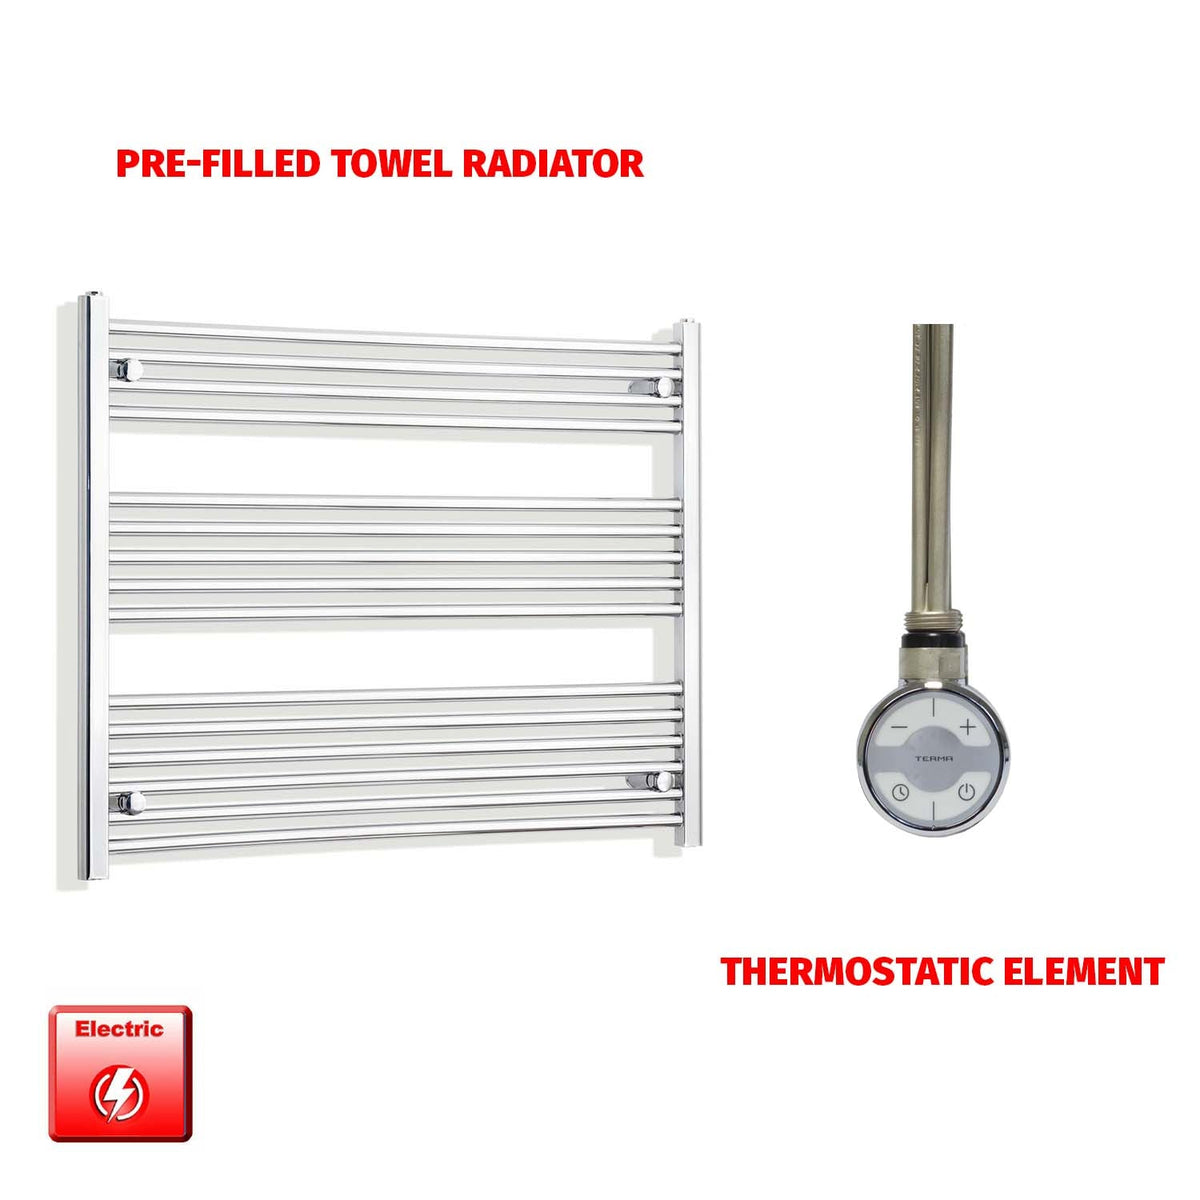 800 x 1000 Pre-Filled Electric Heated Towel Radiator Straight Chrome MOA Thermosatic element no timer